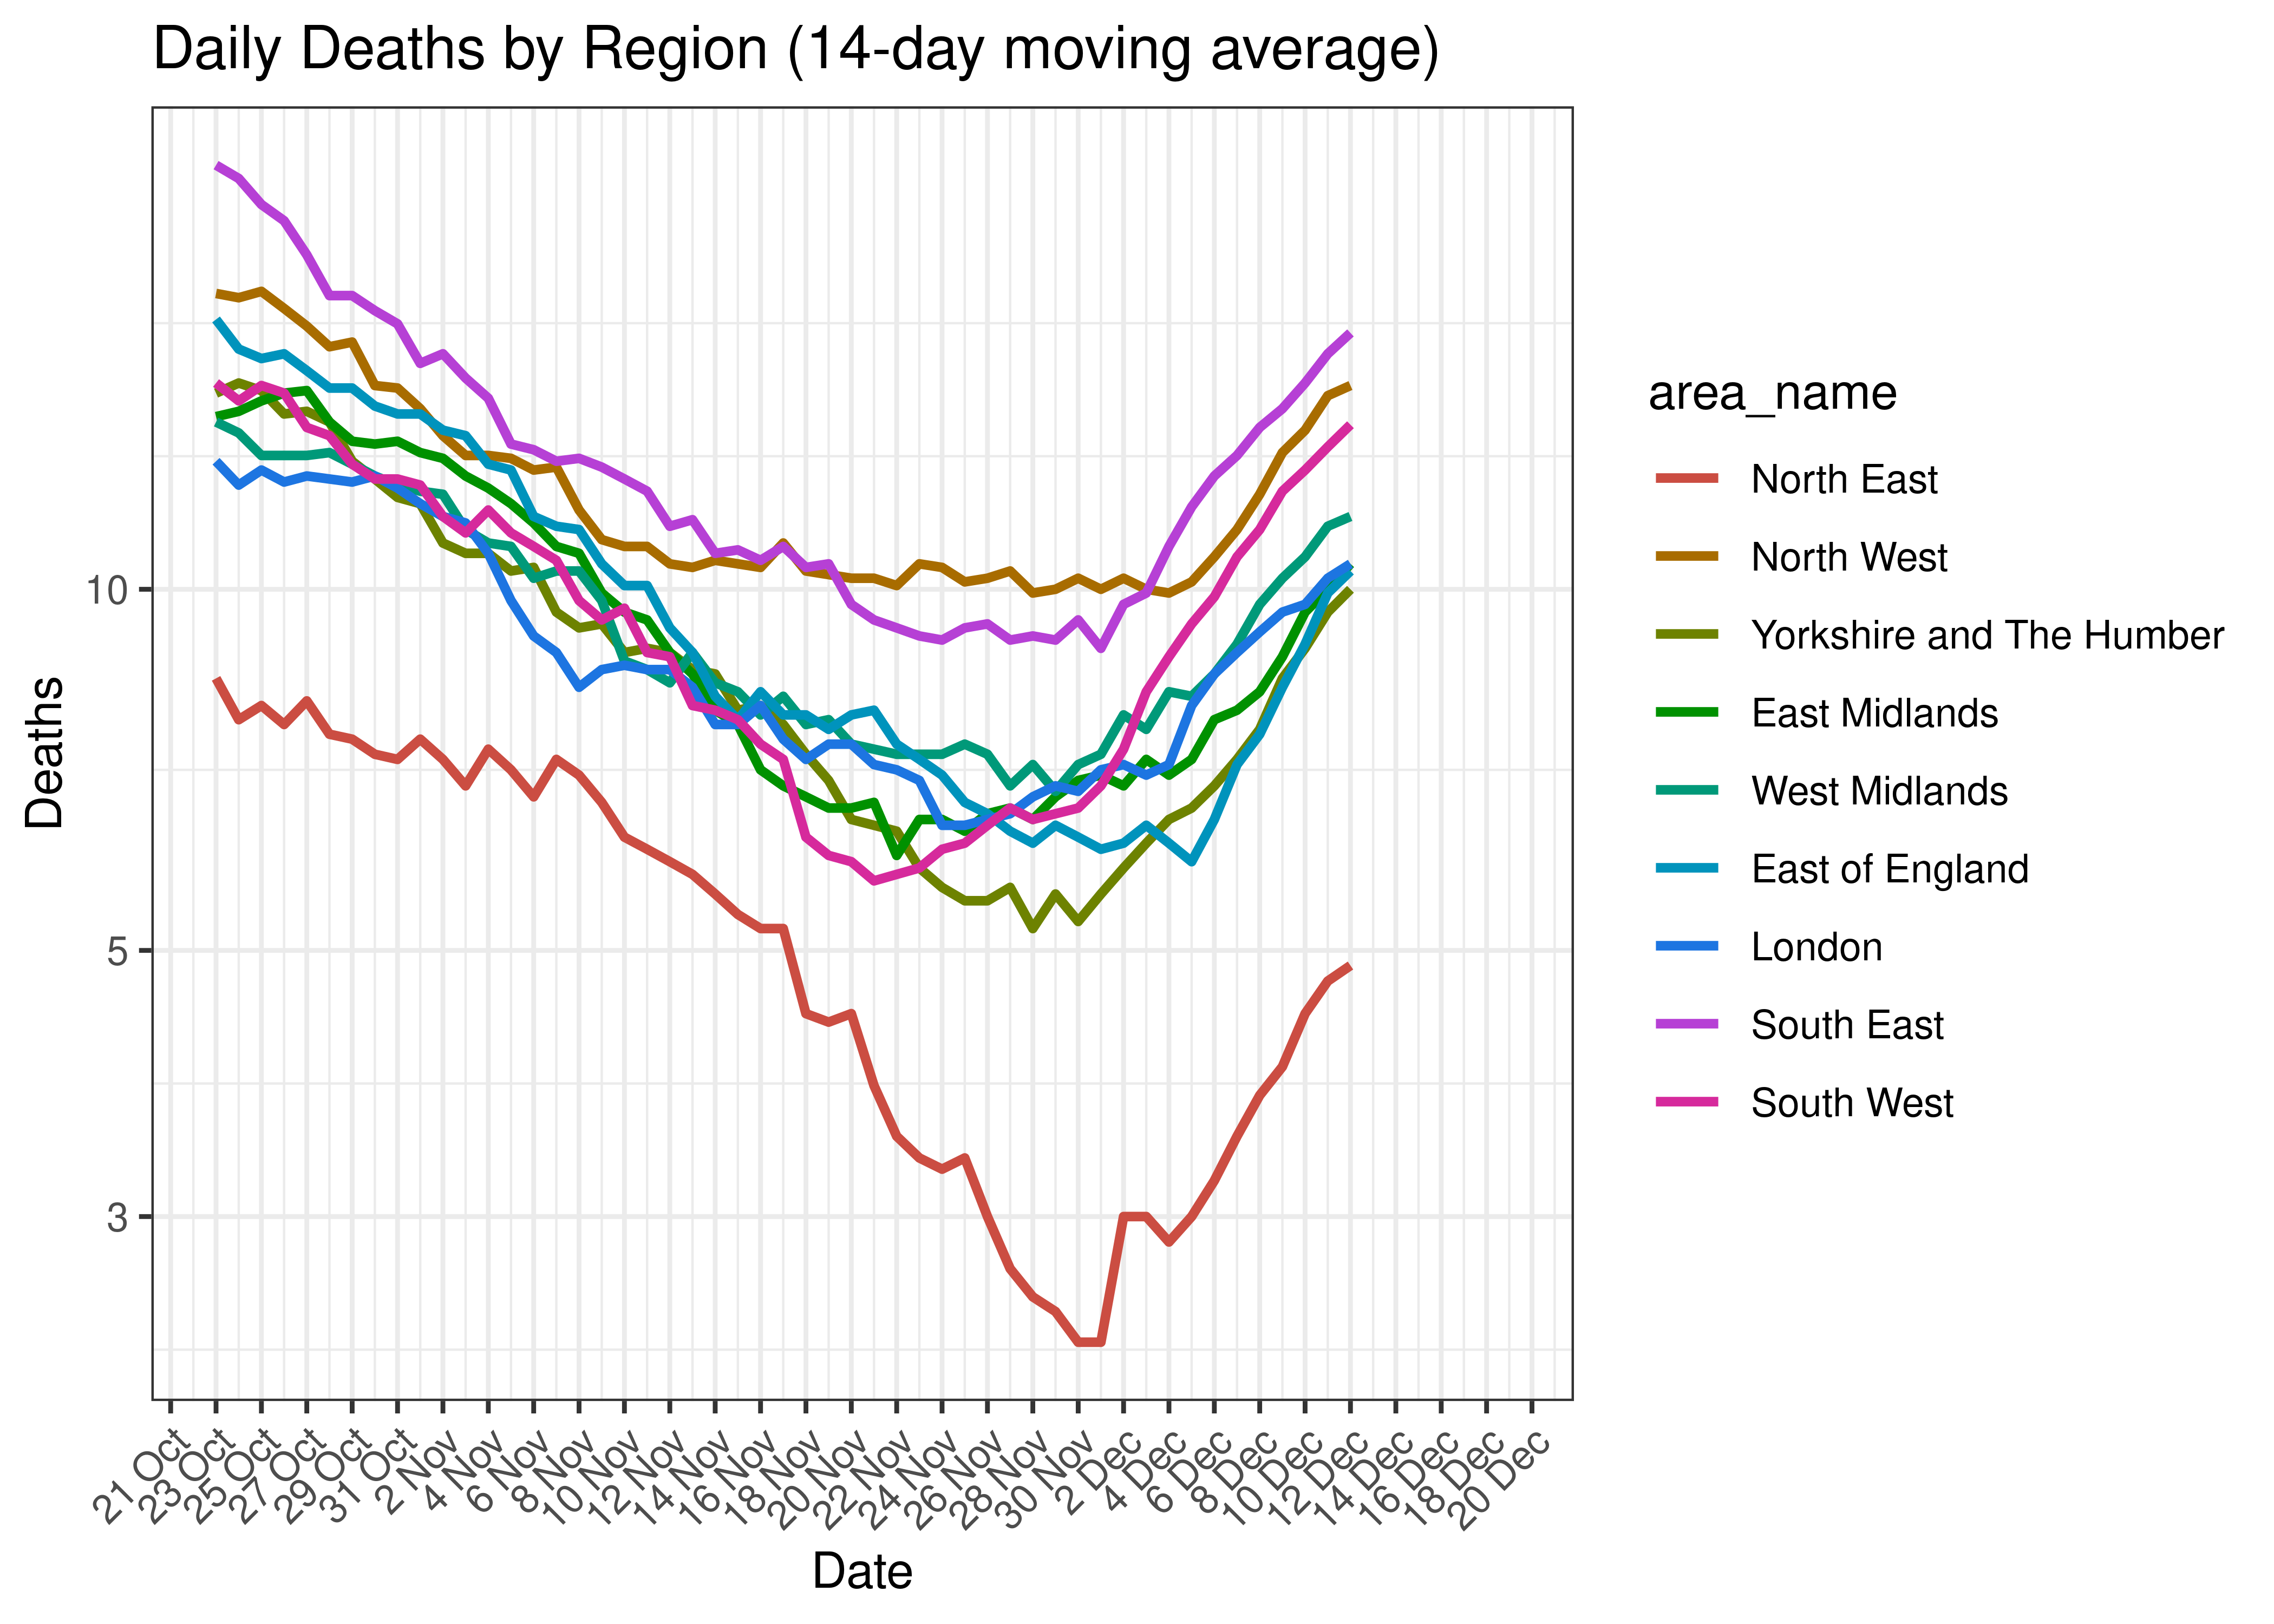 Daily Deaths by Region for Last 60-days (14-day moving average)